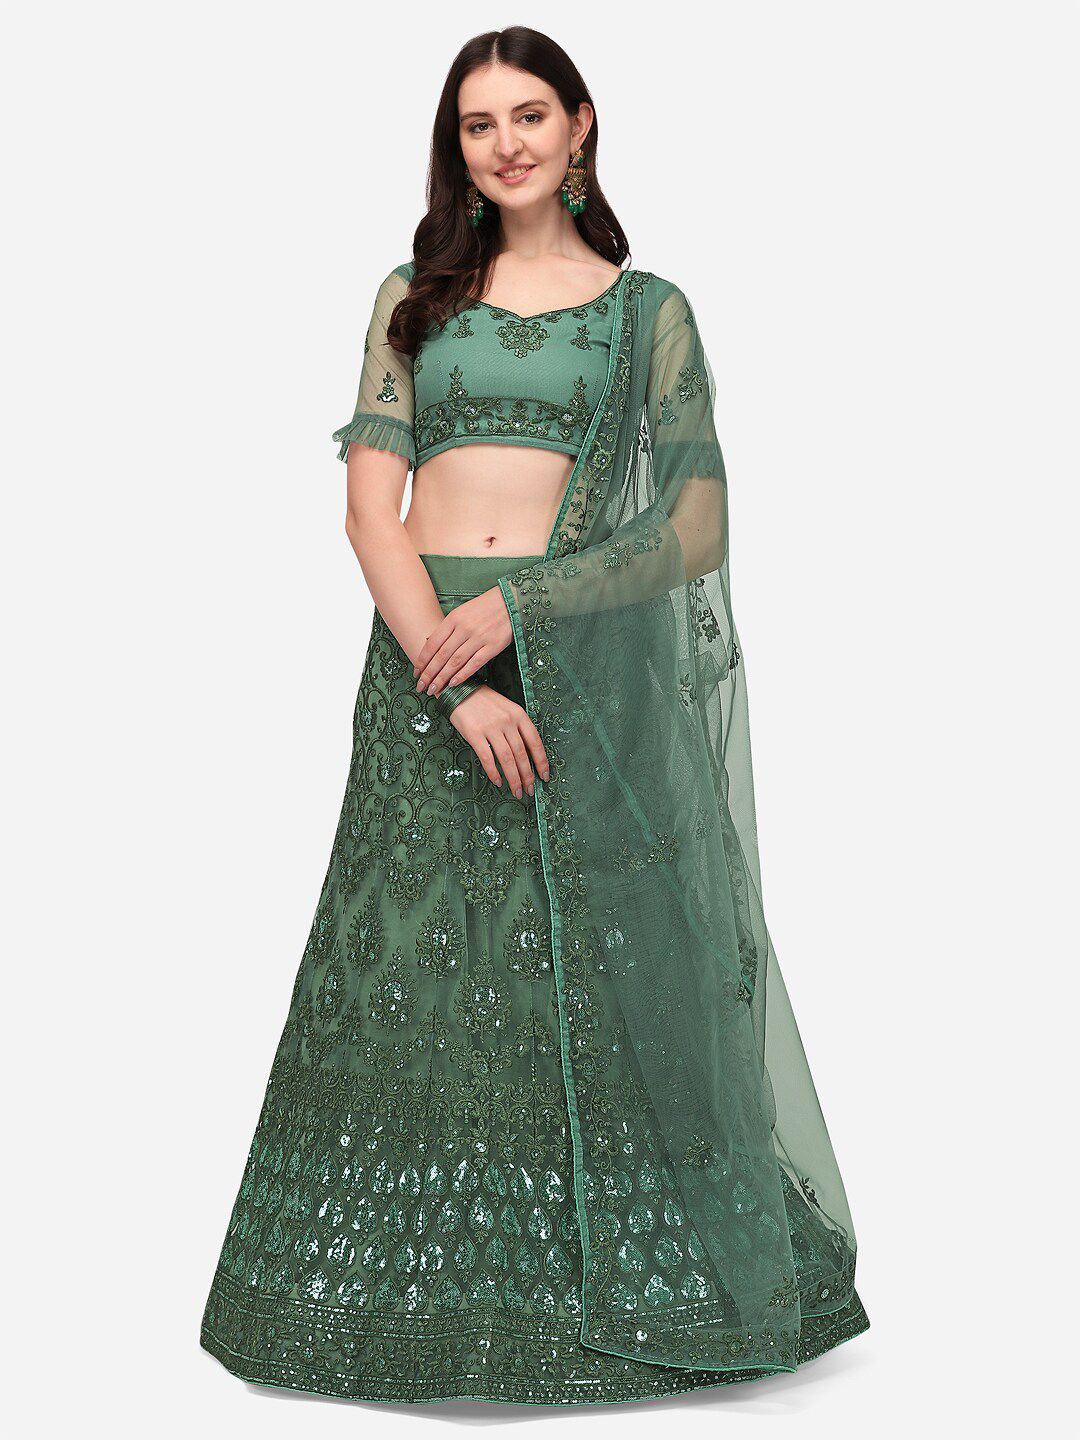 RAJGRANTH Green Embellished Semi-Stitched Lehenga & Unstitched Blouse With Dupatta Price in India